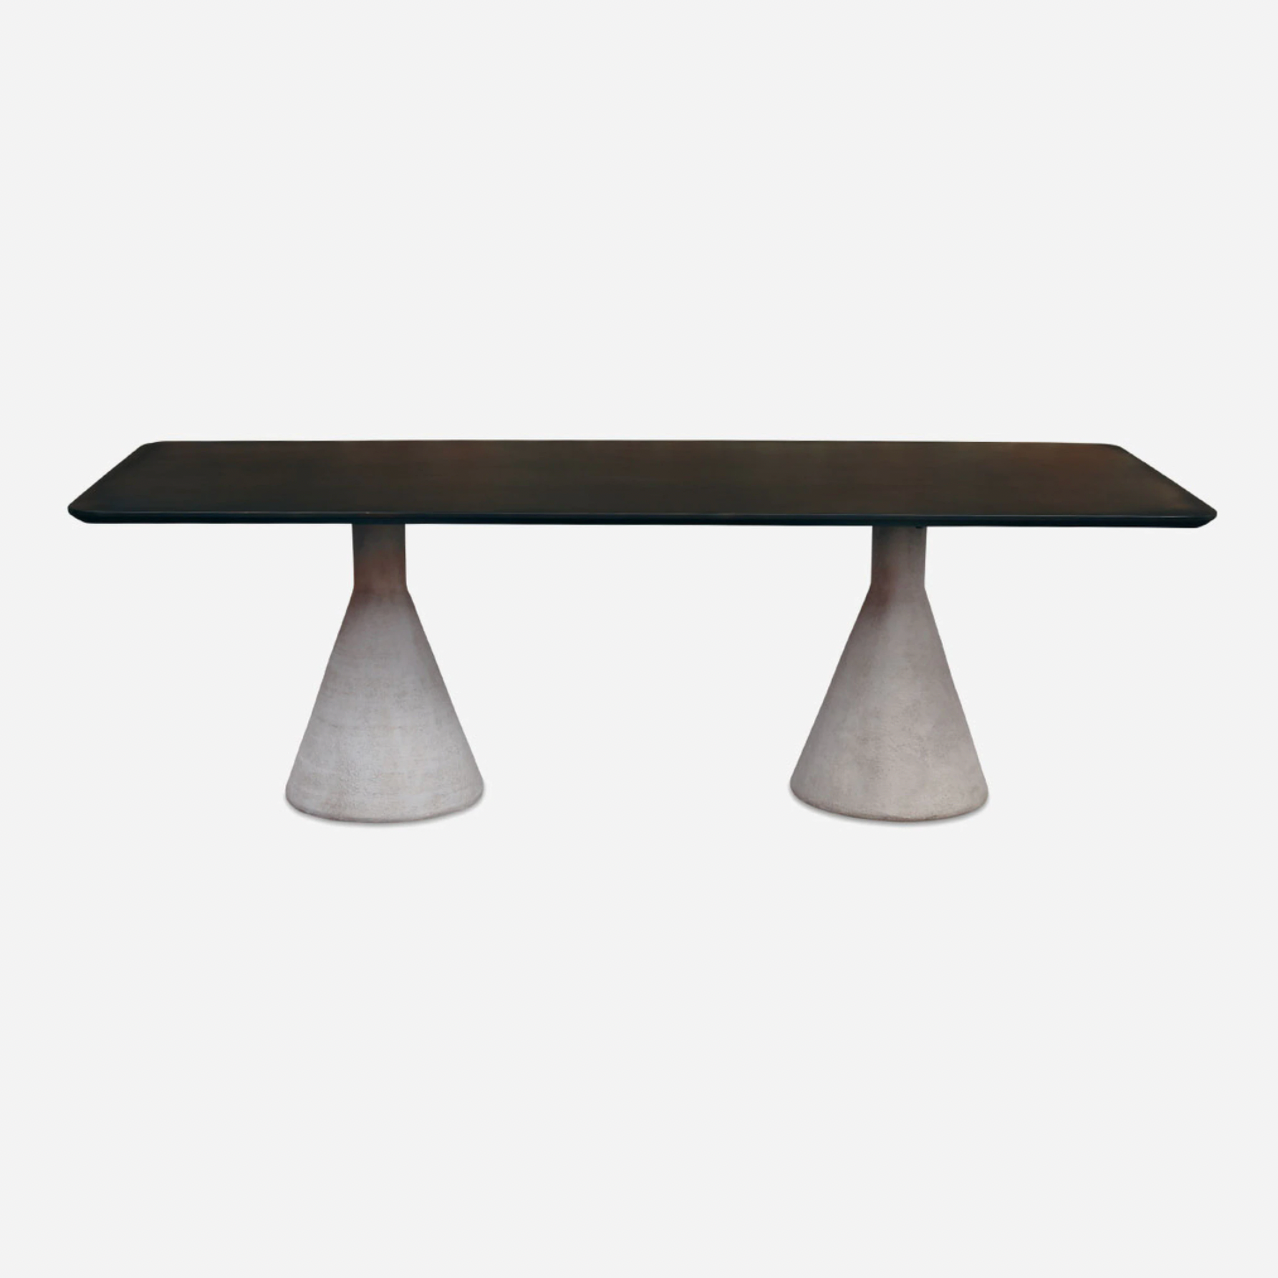 This Conical Dining Table is made from stainless steel and inspired by Willy Guhl Hourglass Planters. The unique base is made from aluminum with a concrete finish - a statement piece for any dining room or kitchen!   Size: 40"d x  94"w x 30" h Materials: Stainless Steel